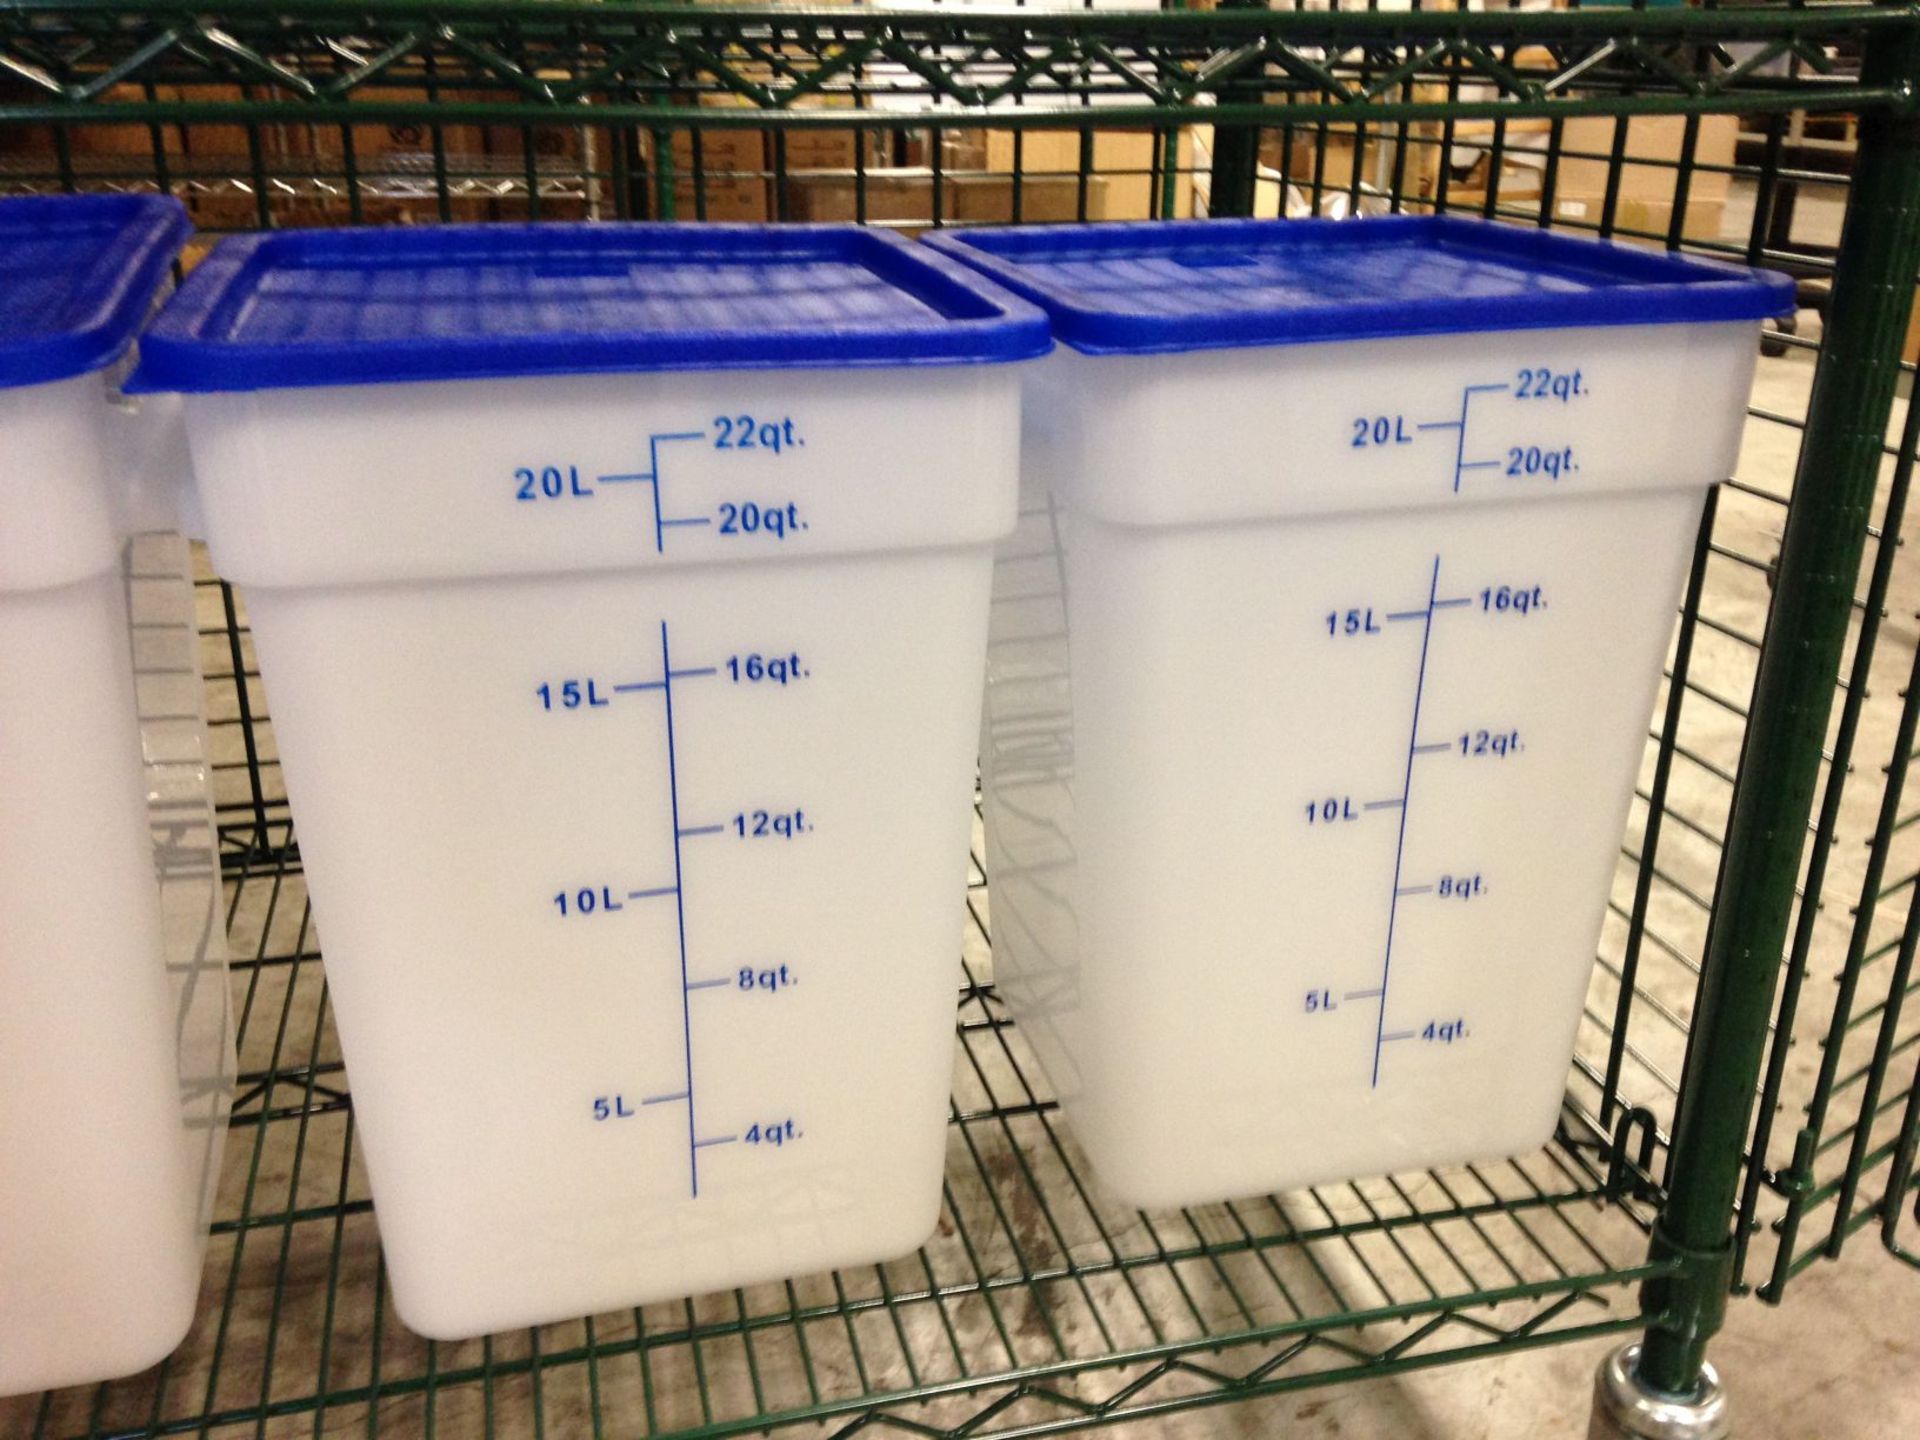 22qt Ingredient Bins with Lids - Lot of 2